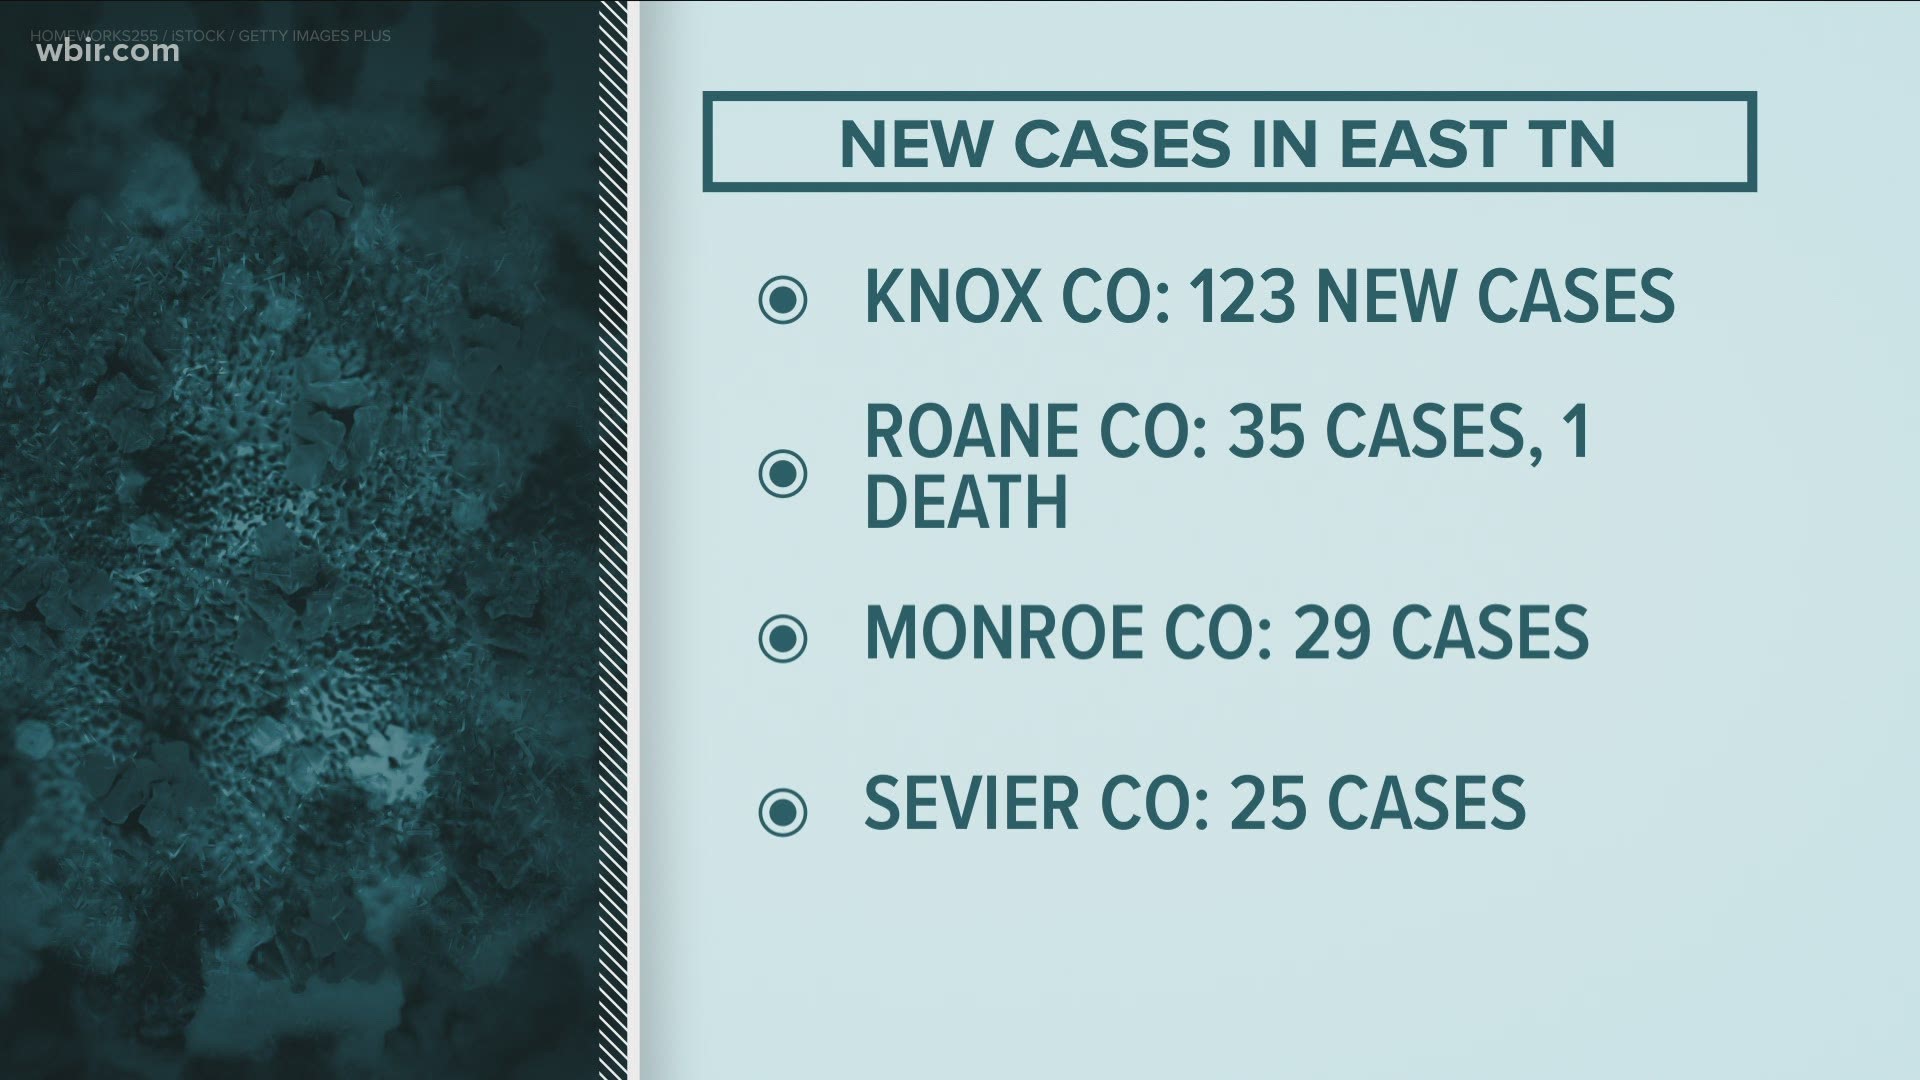 Knox County with 123 new cases, Roane County with 35 and one new death, Monroe County with 29 cases and 25 in Sevier County.